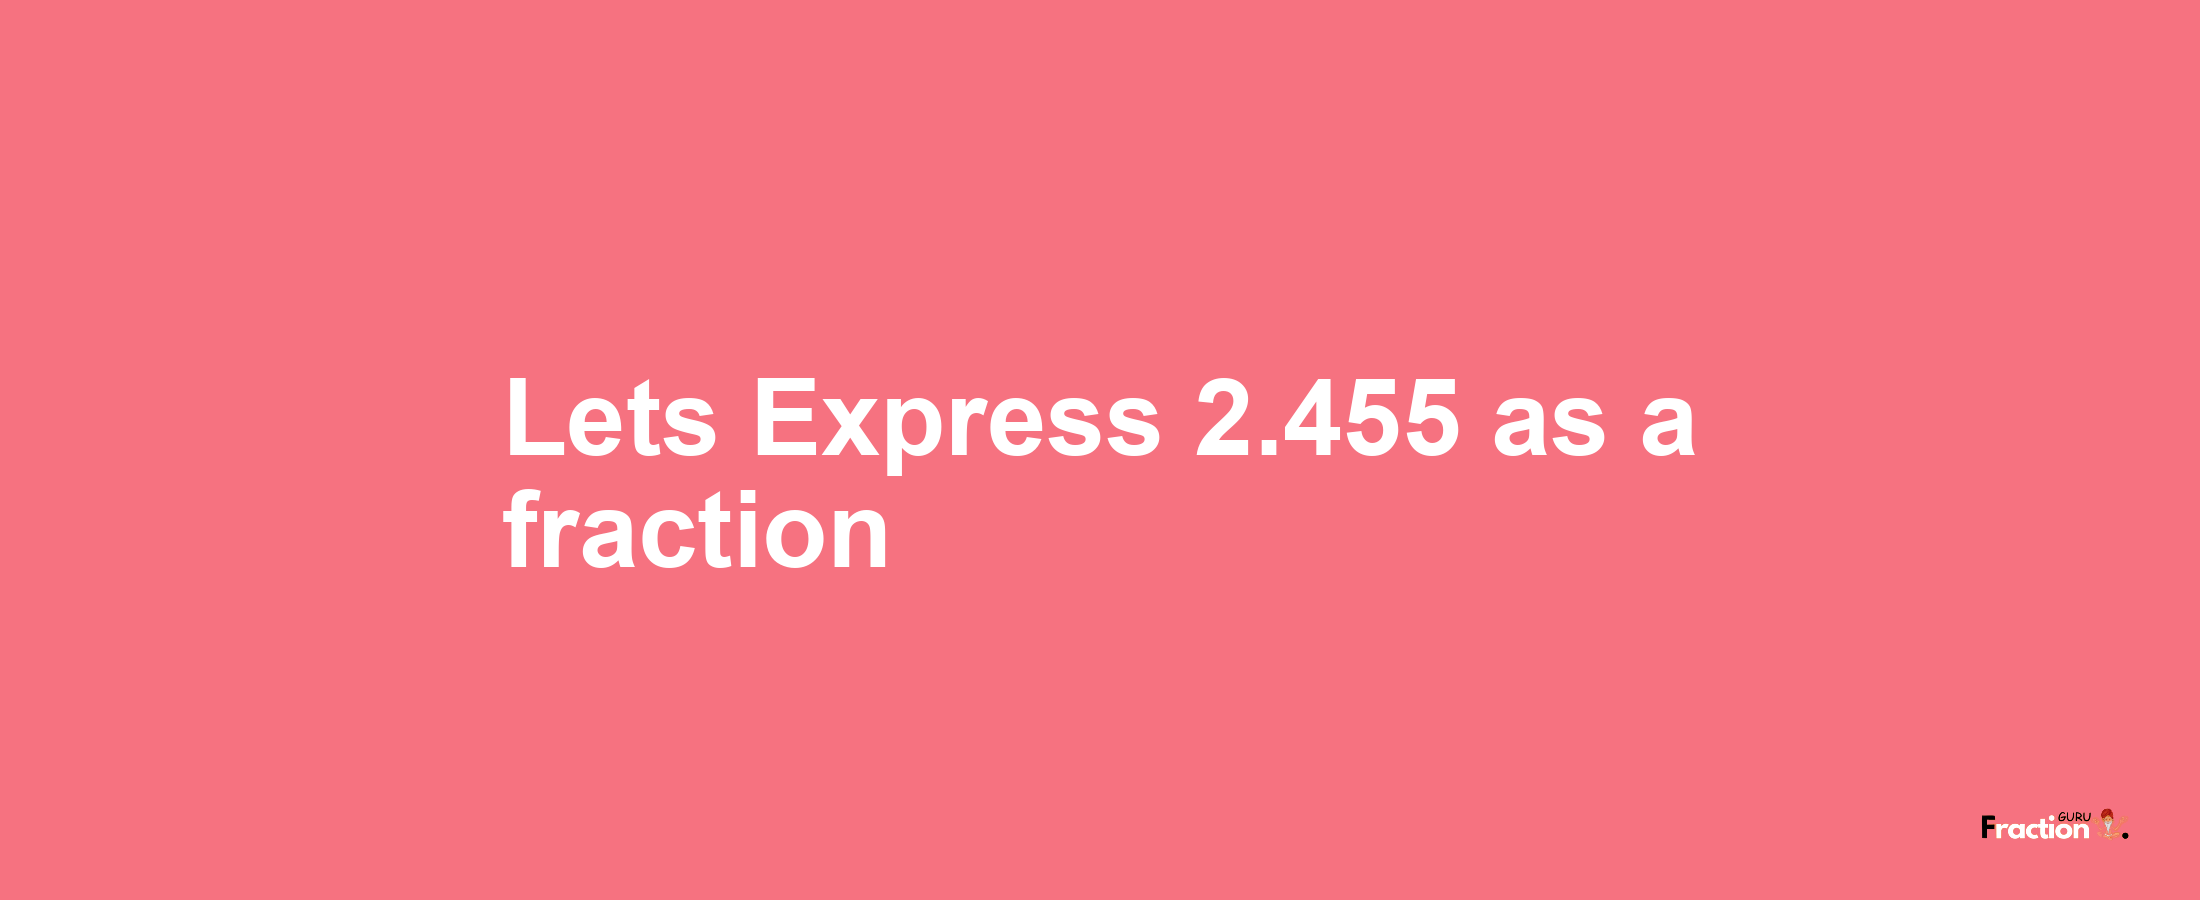 Lets Express 2.455 as afraction